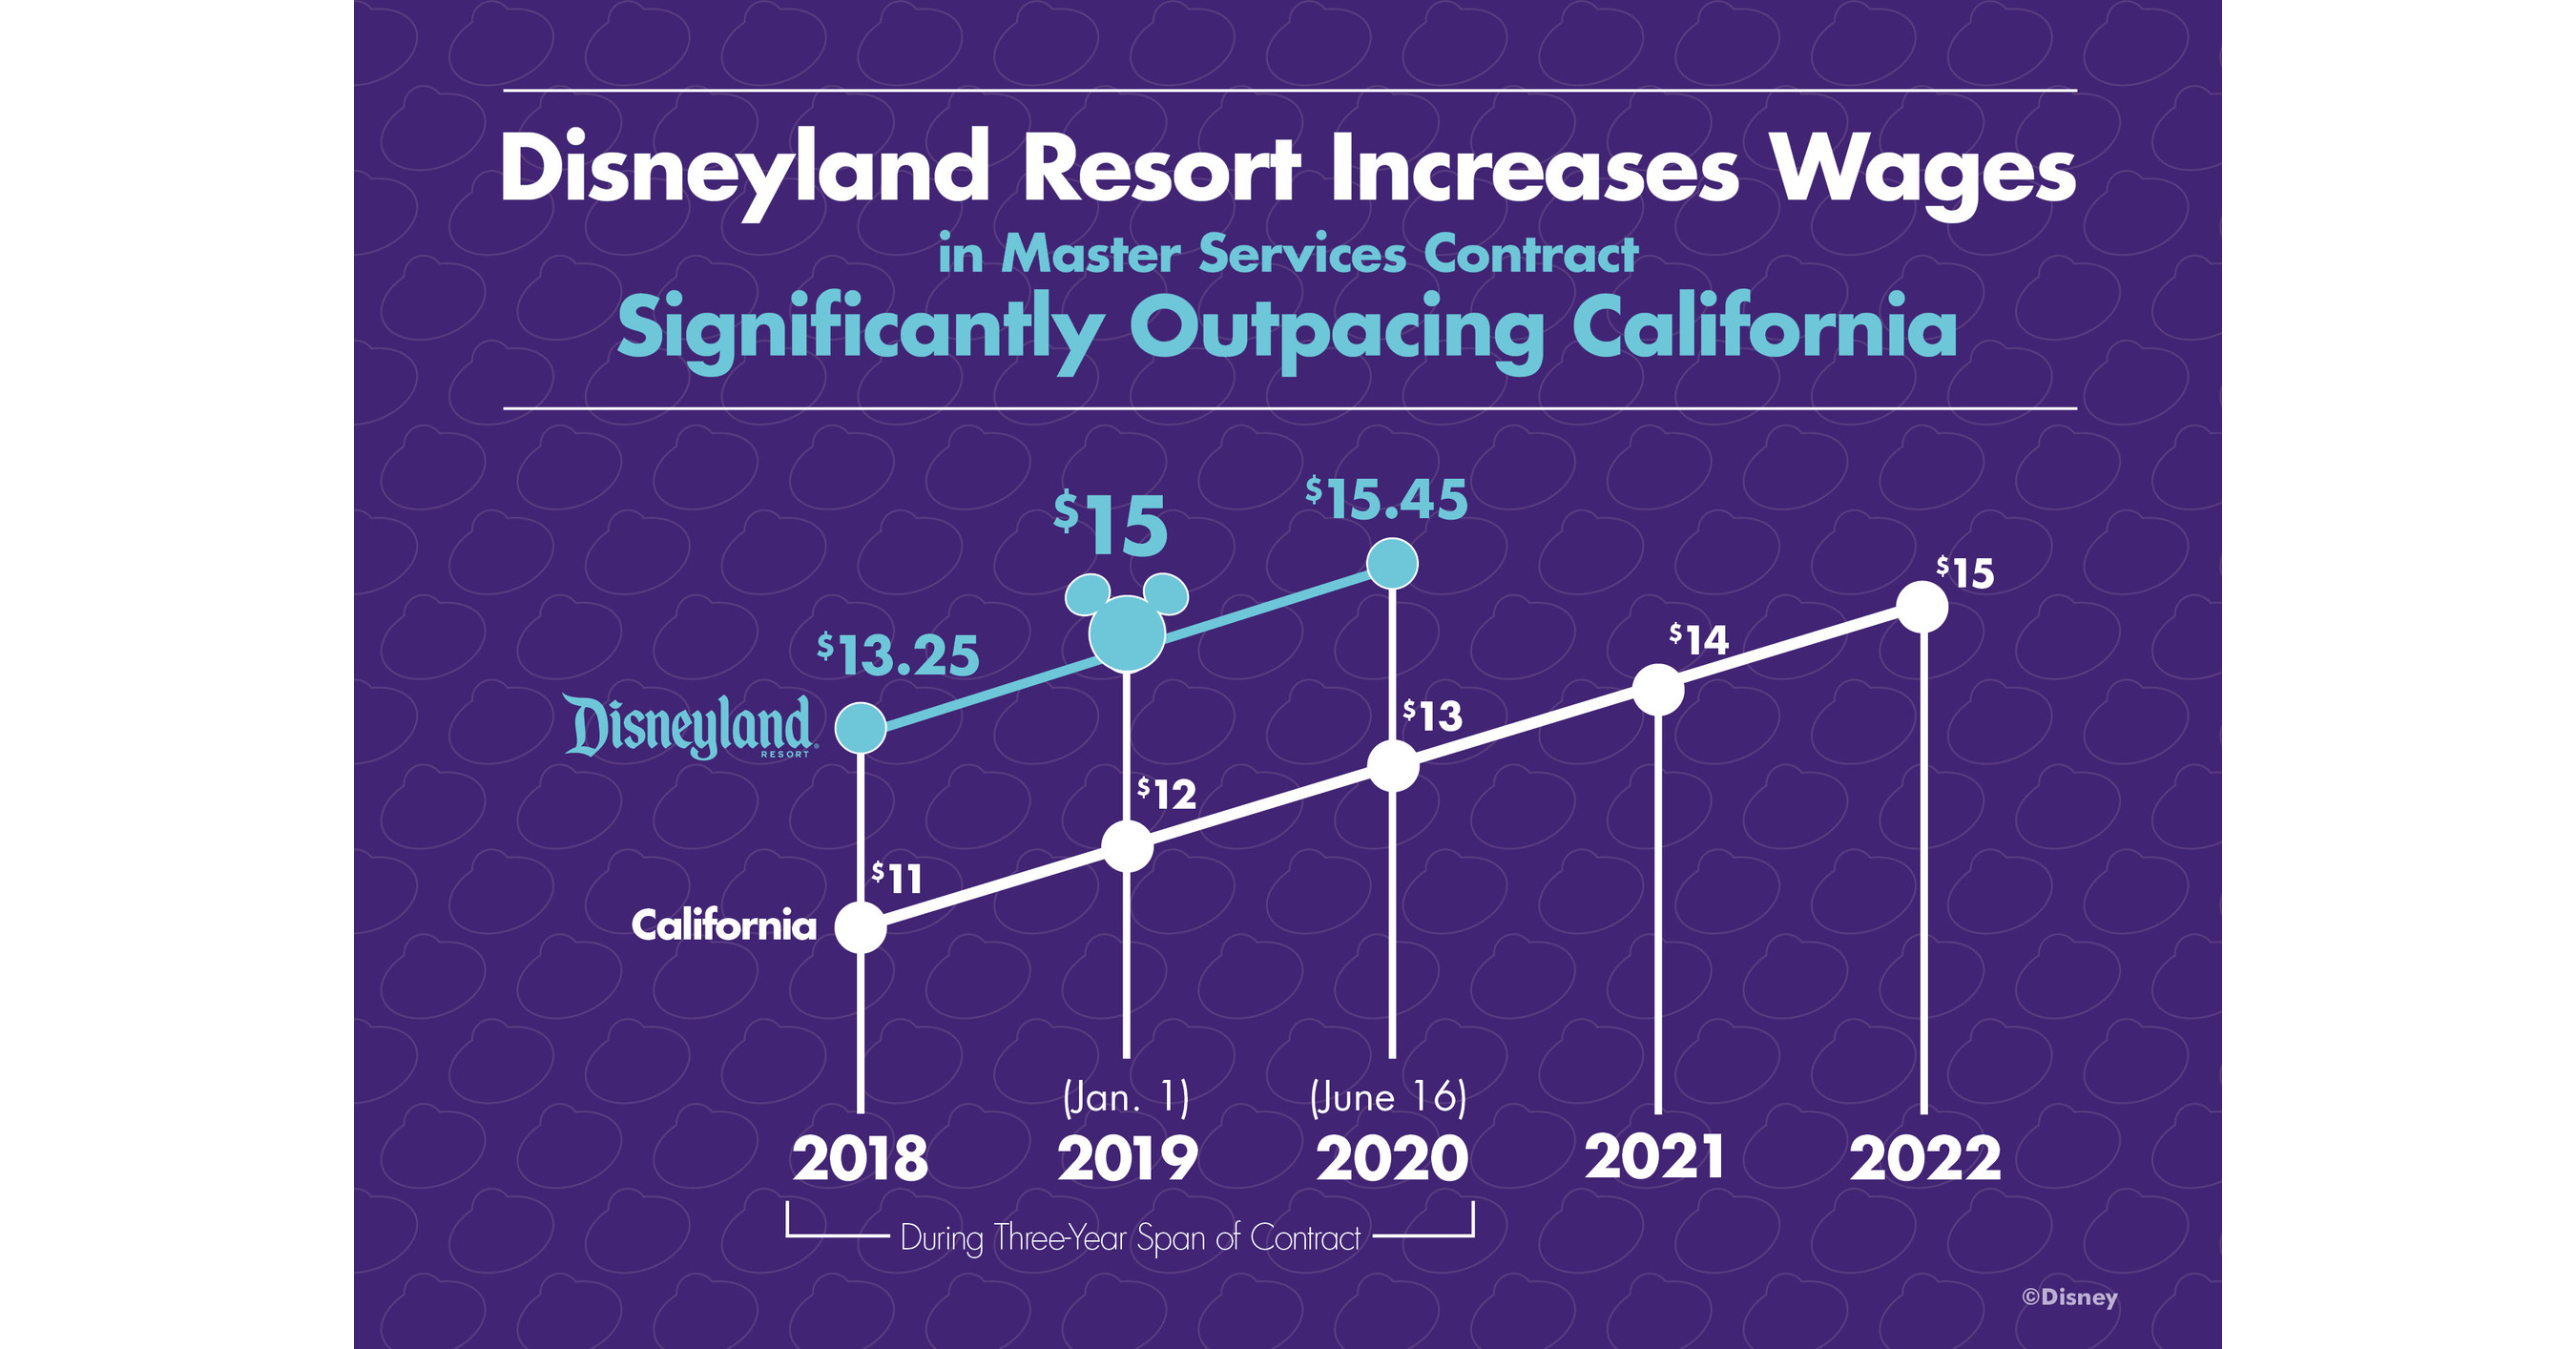 Disneyland Resort Closes Deal With Largest Labor Unions For One of the